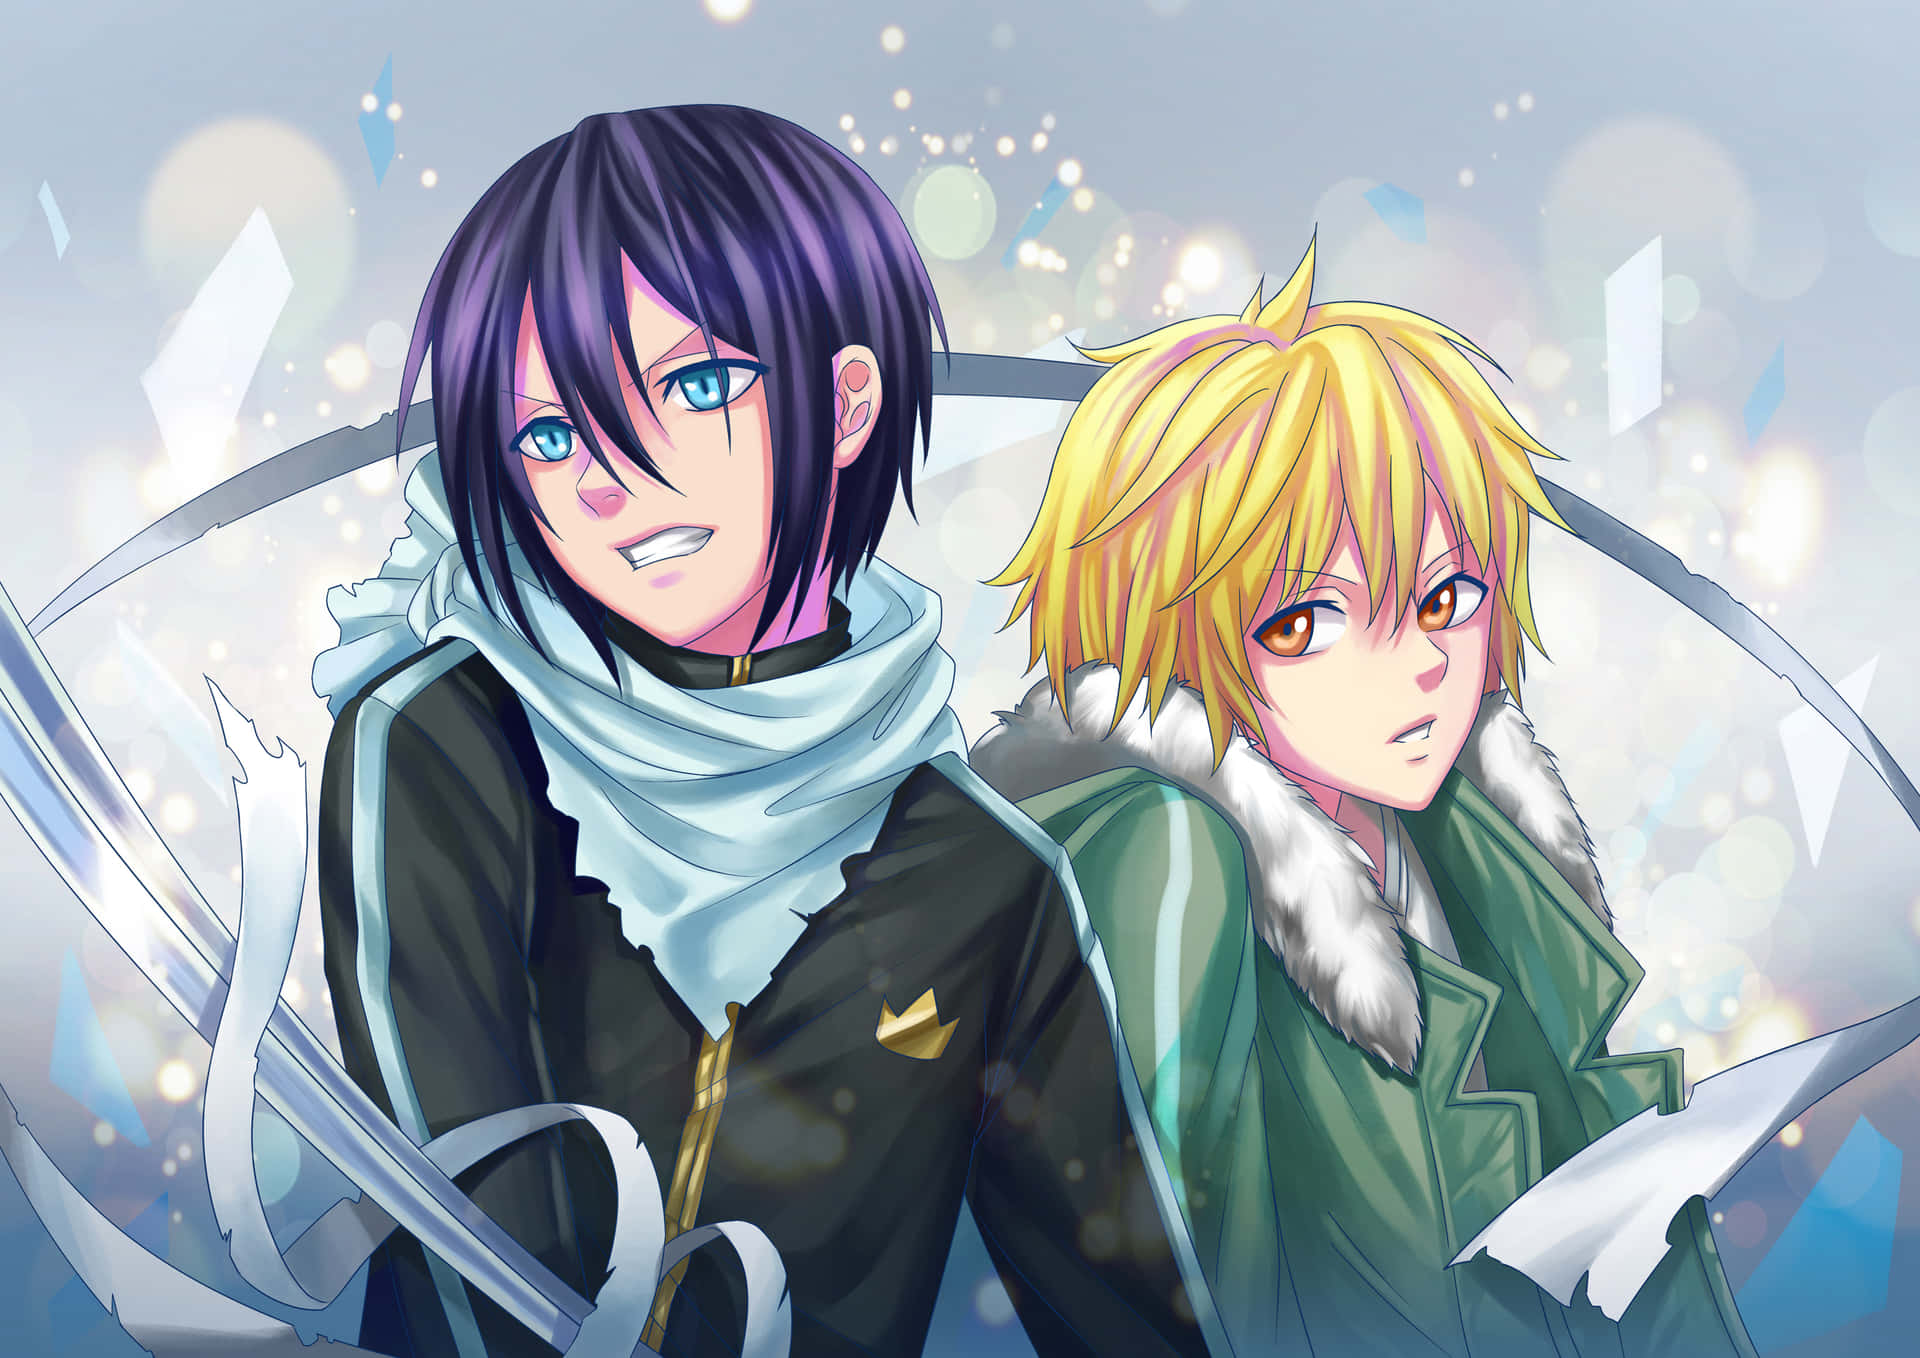 Follow Noragami on an Epic Journey of Adventure and Discovery